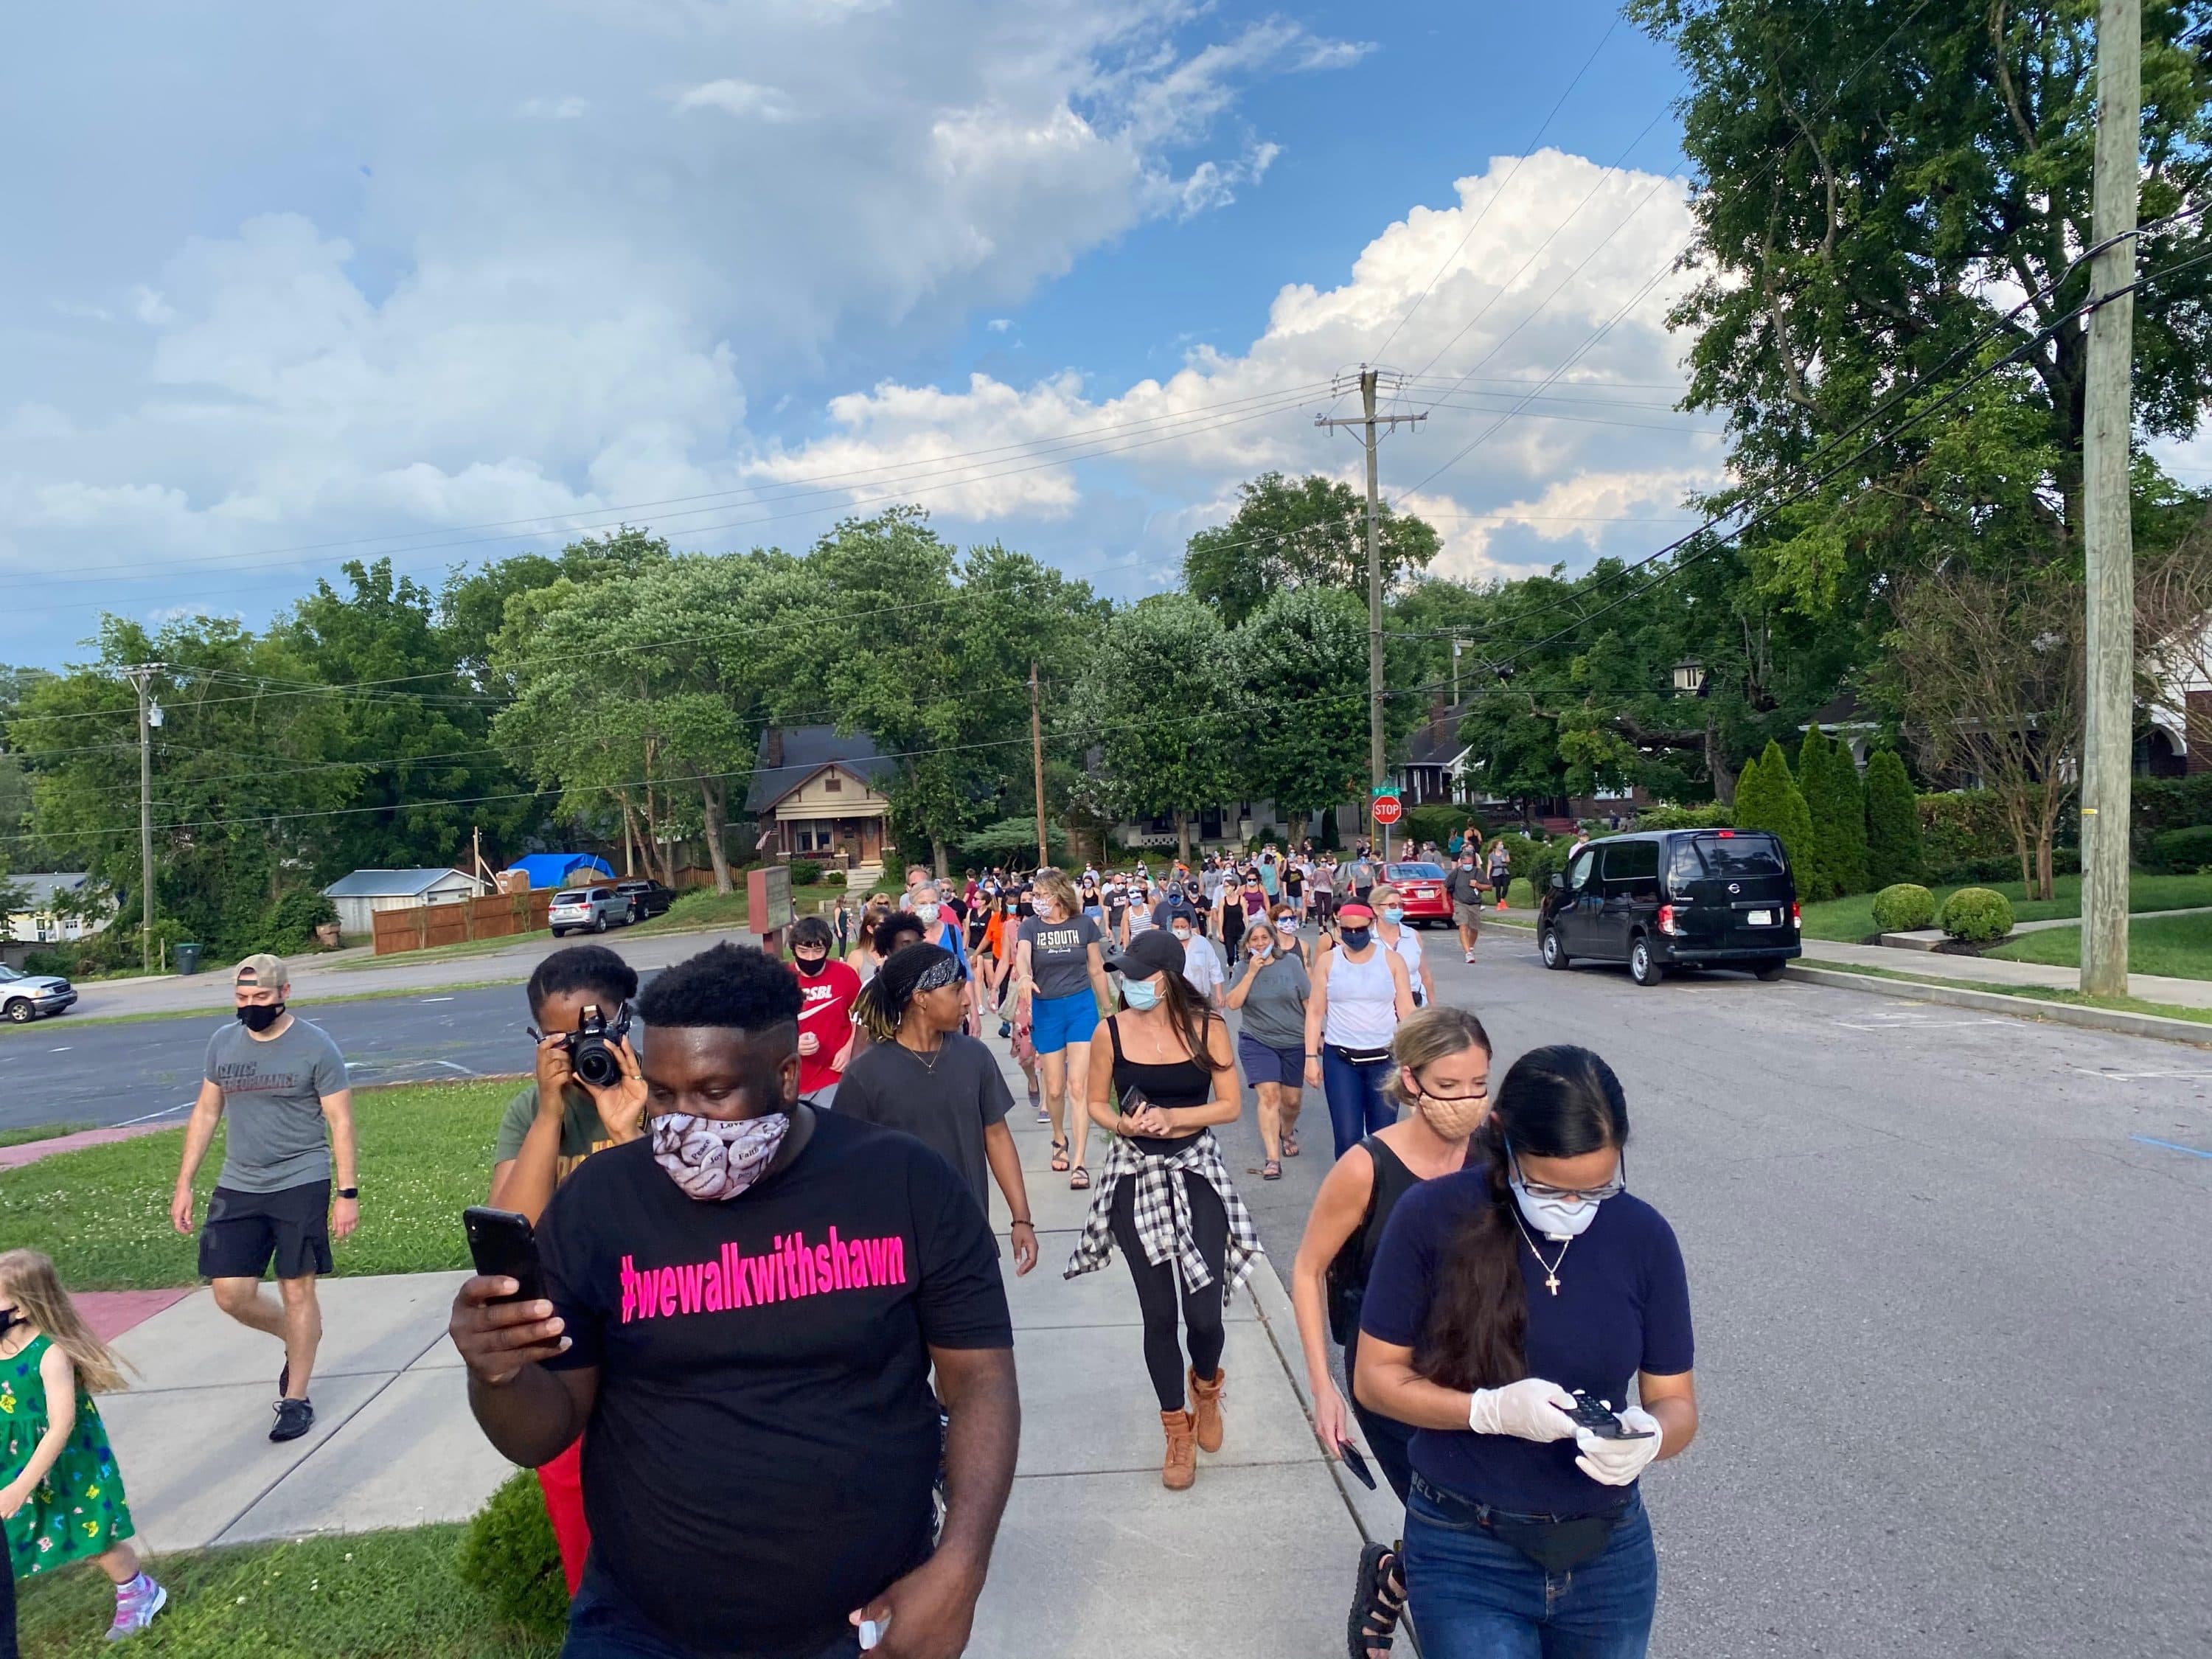 Shawn Dromgoole organized a walk in his Nashville neighborhood to call for justice and unity. Now he wants to take his message to different cities across the country. (Courtesy Shawn Dromgoole)